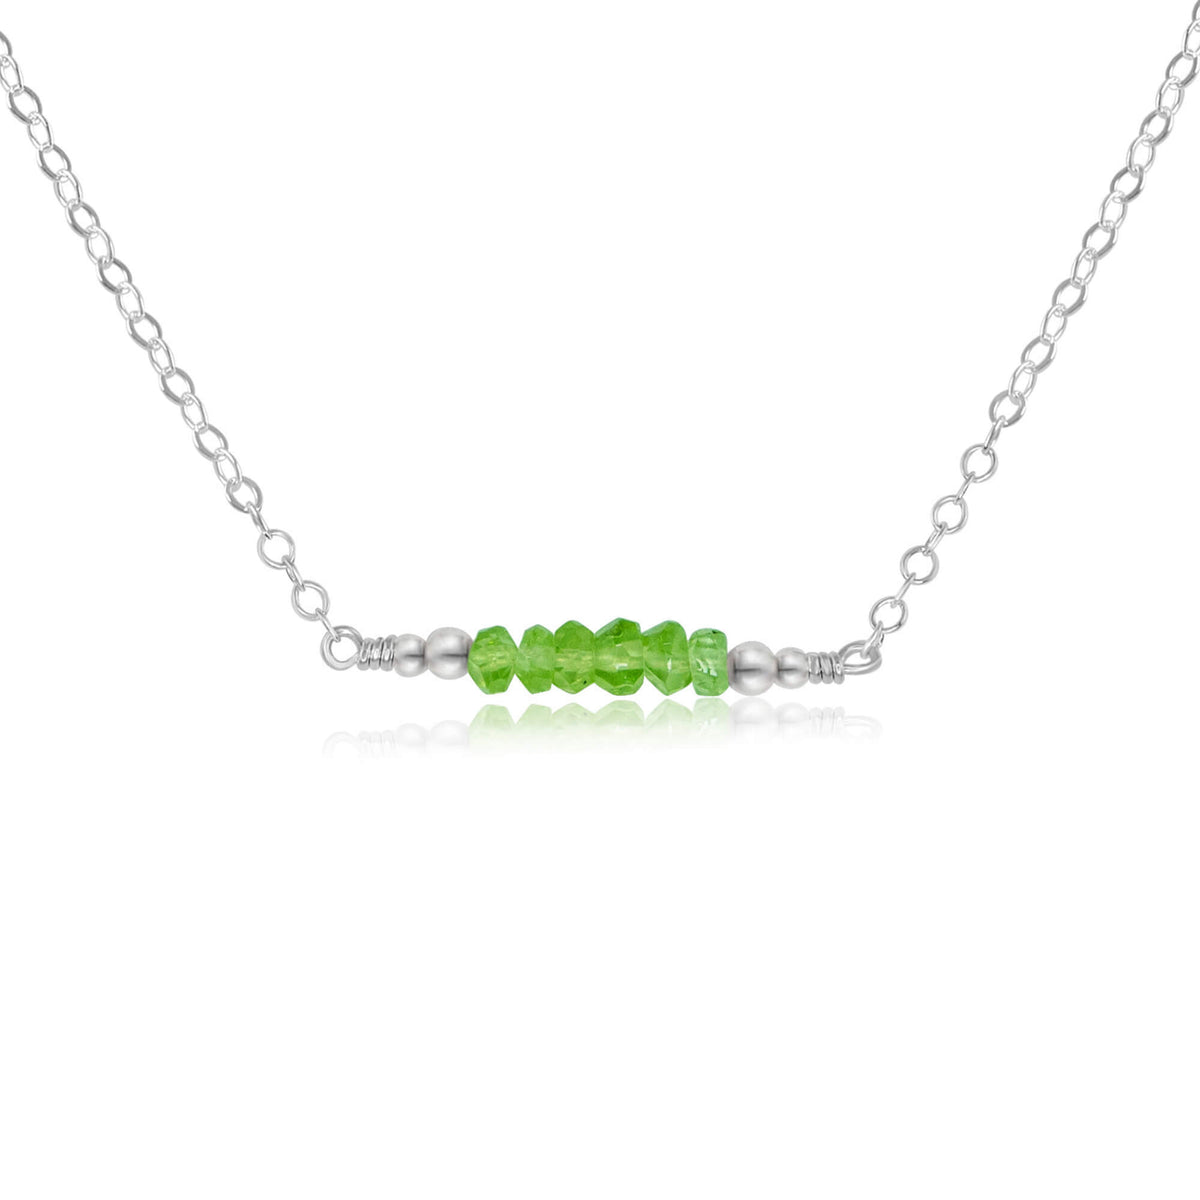 Faceted Bead Bar Necklace - Peridot - Sterling Silver - Luna Tide Handmade Jewellery